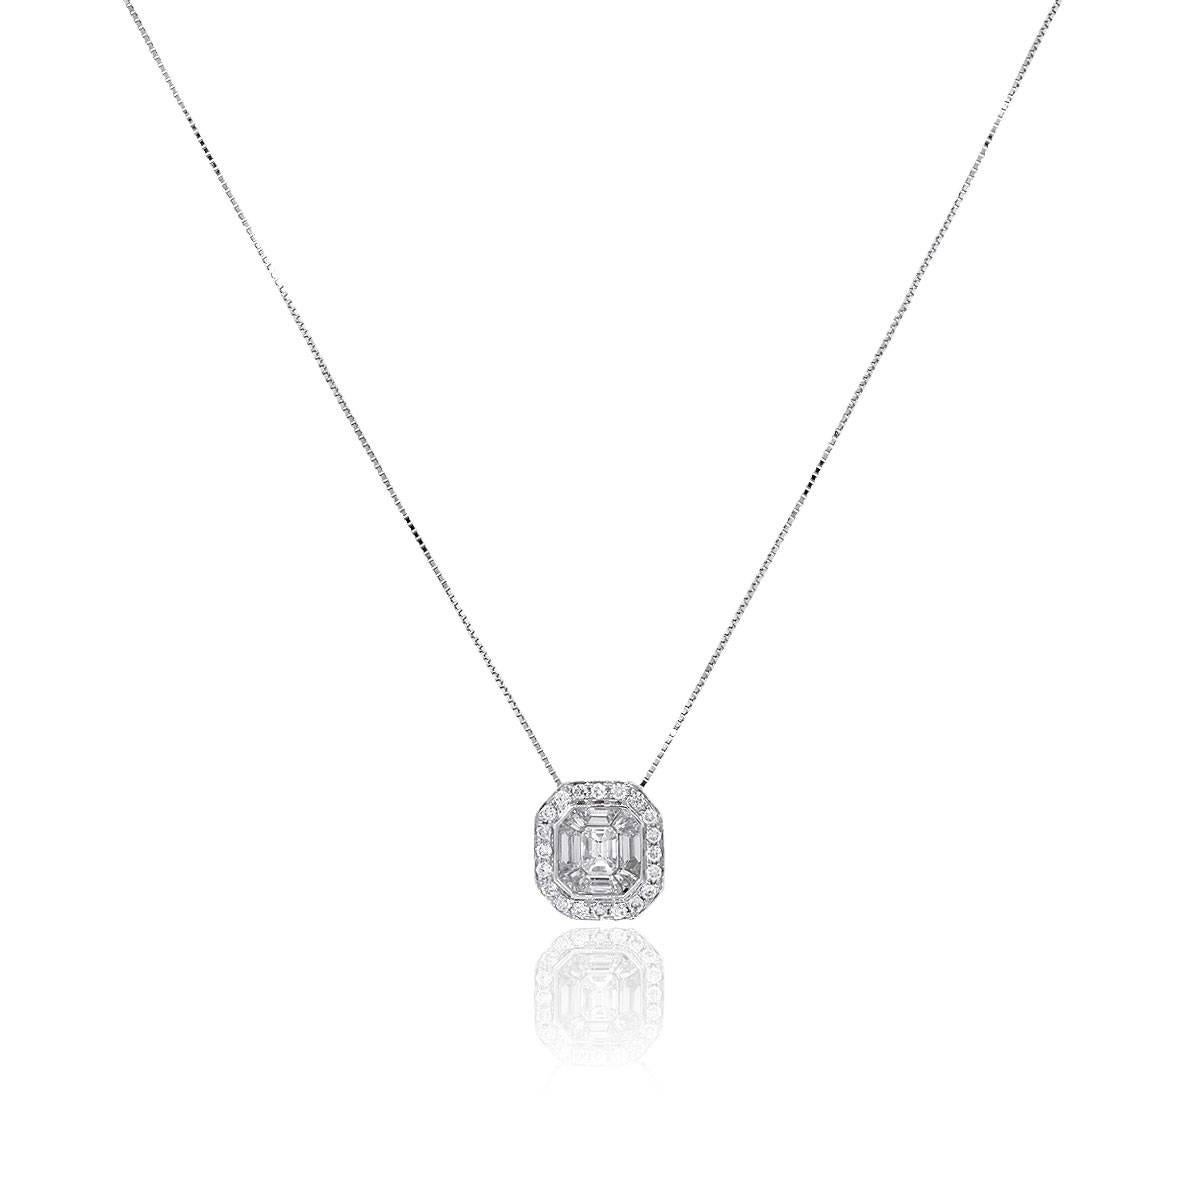 Material: 18k White Gold
Round Diamond Details: Approximately 0.14ctw of round brilliant diamonds. Diamond are G/H in color and VS in clarity.
Baguette Diamond Details: Approximately 0.53ctw of baguette diamonds. Diamonds are G/H in color and VS in